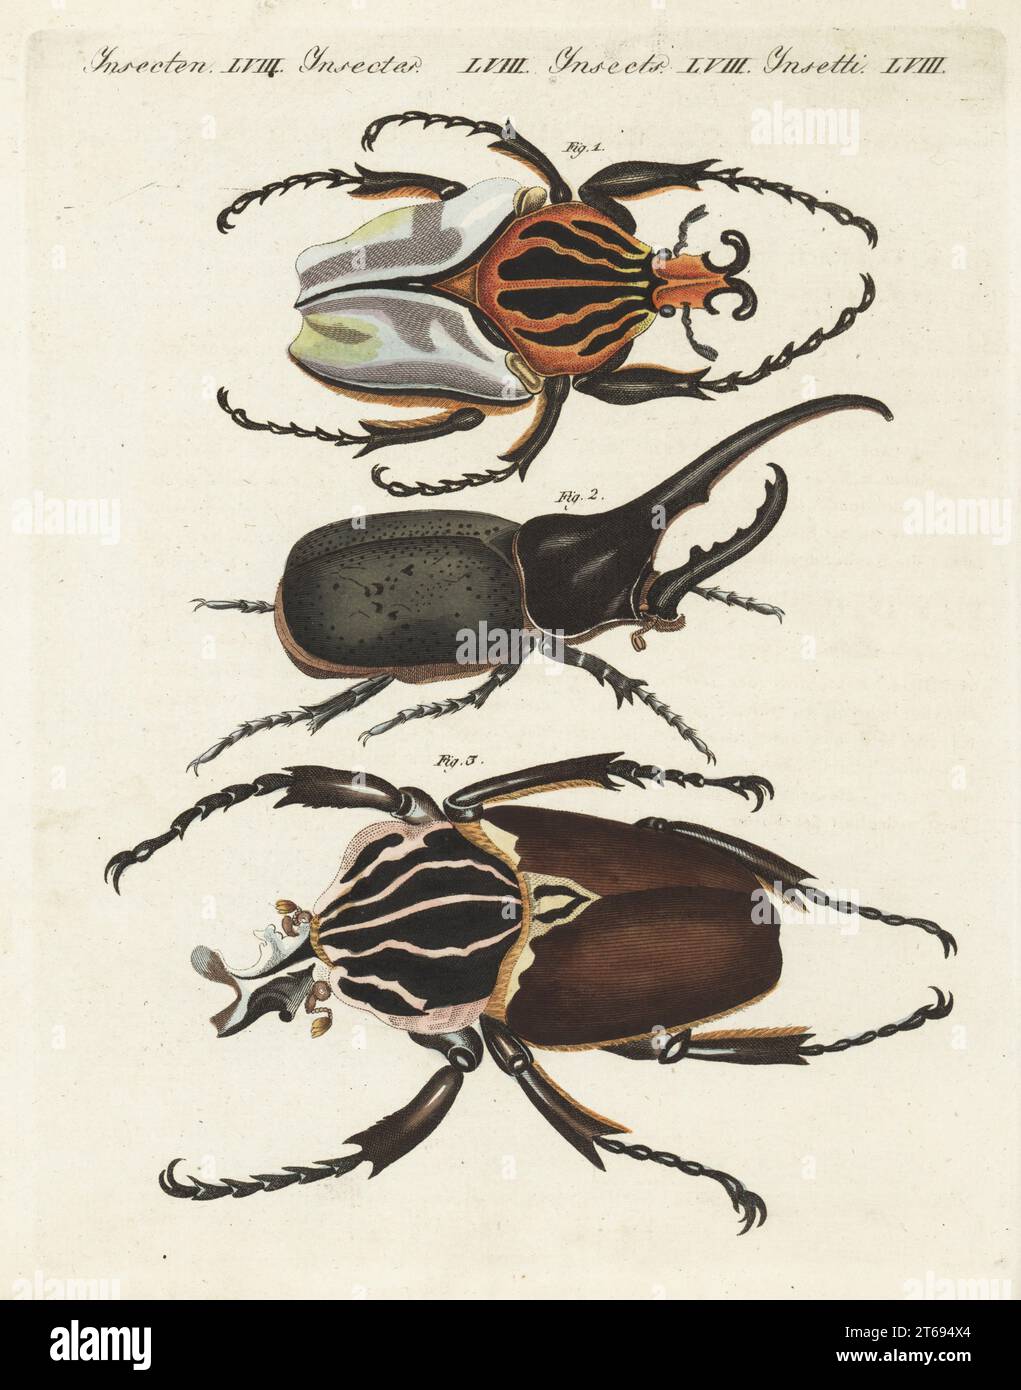 Chief goliath, Goliathus cacicus 1,3, and Hercules beetle, Dynastes hercules 2. Handcoloured copperplate engraving from Carl Bertuch's Bilderbuch fur Kinder (Picture Book for Children), Weimar, 1810. A 12-volume encyclopedia for children illustrated with almost 1,200 engraved plates on natural history, science, costume, mythology, etc., published from 1790-1830. Stock Photo